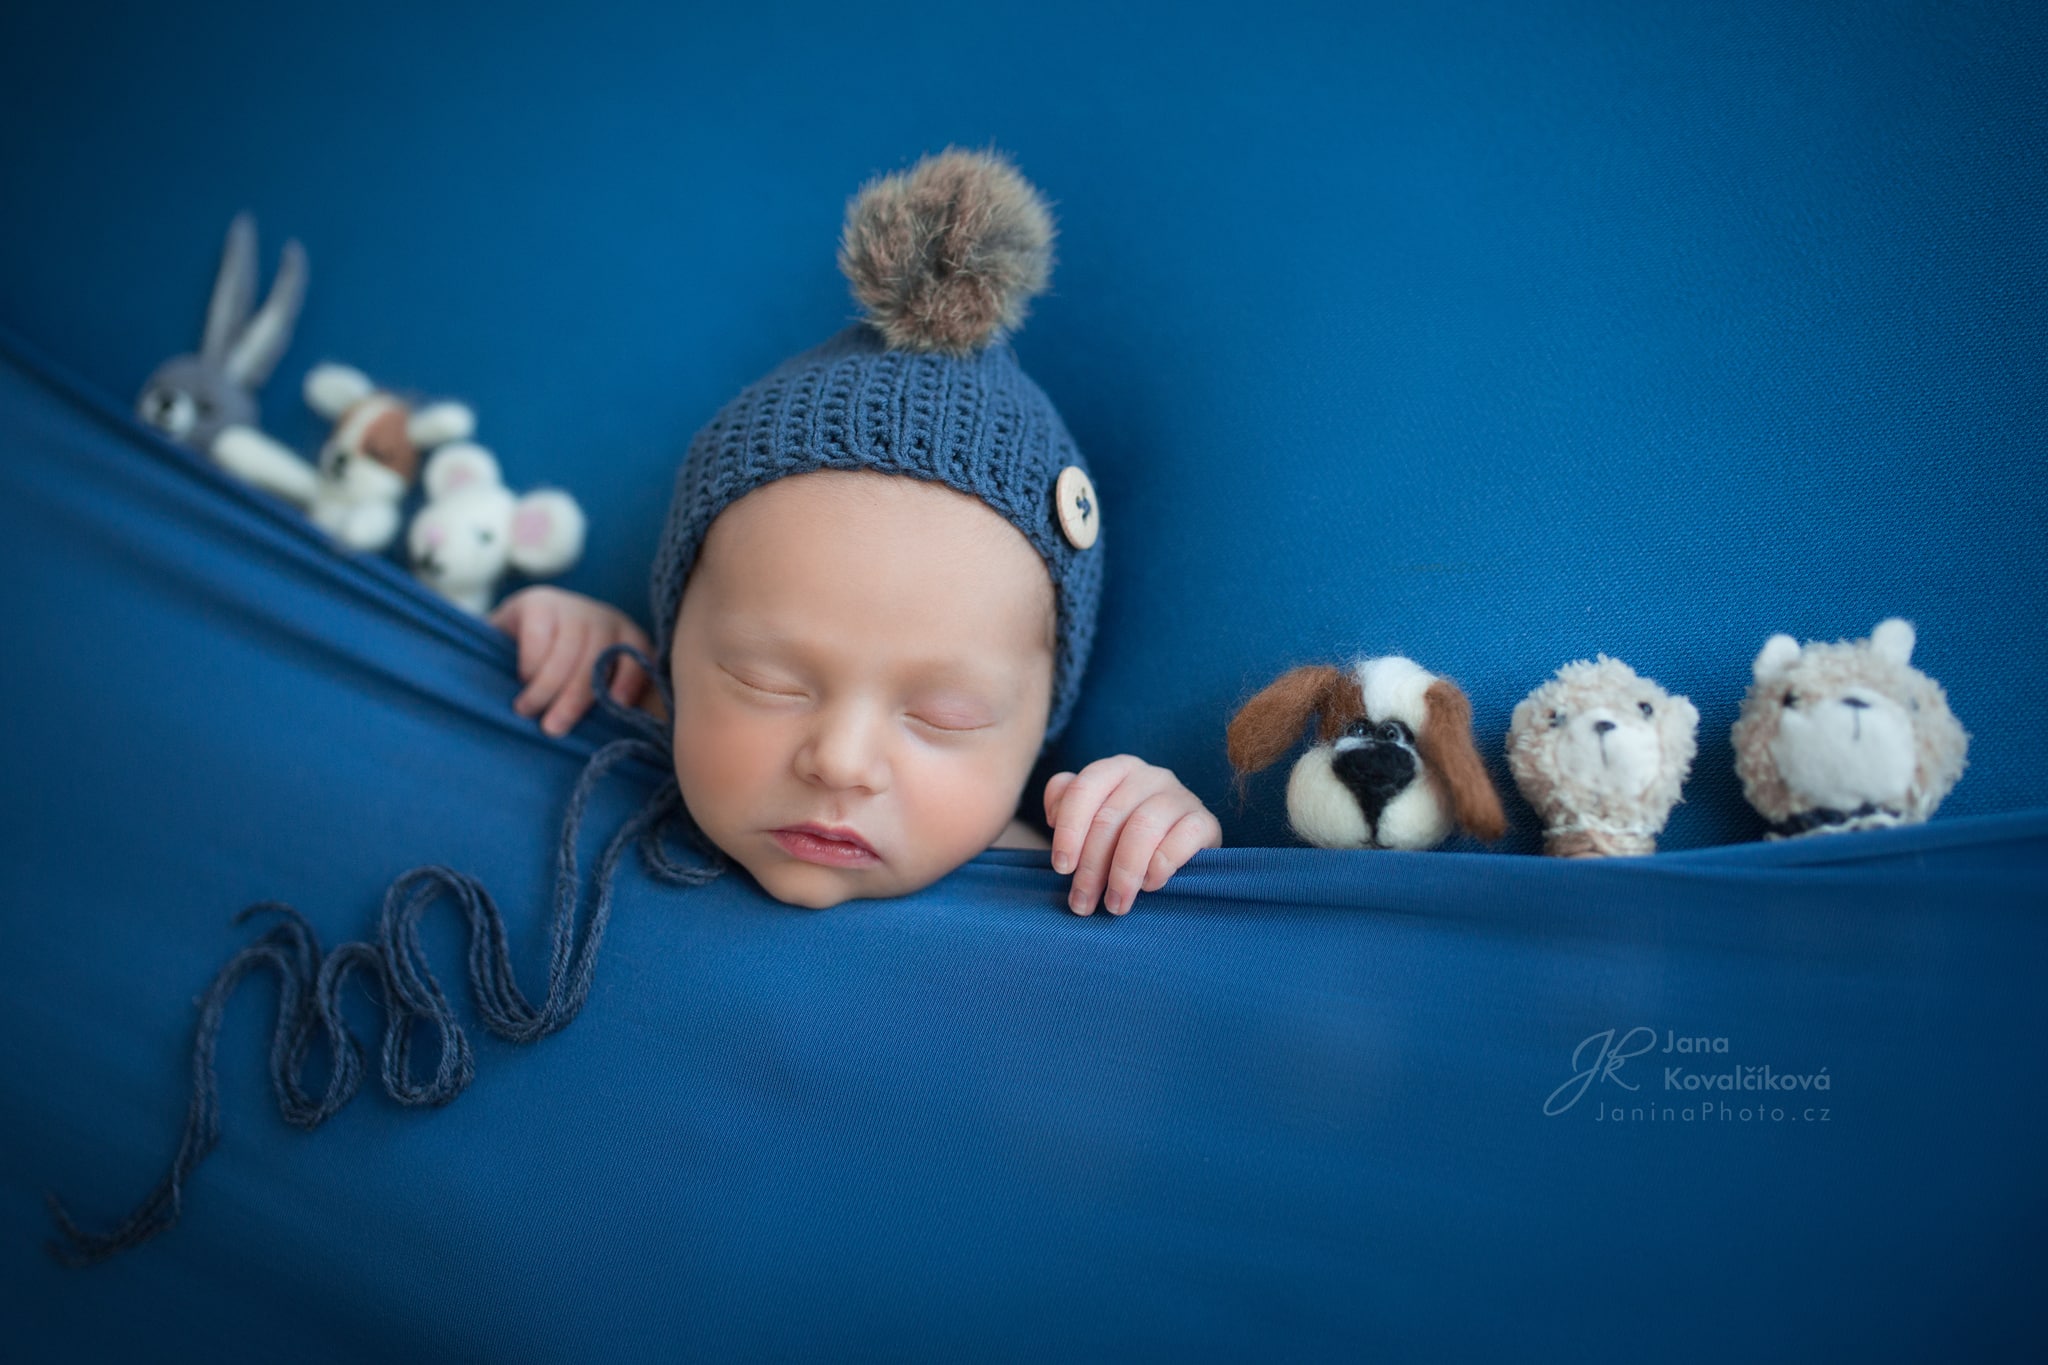 How to Do Newborn Photography